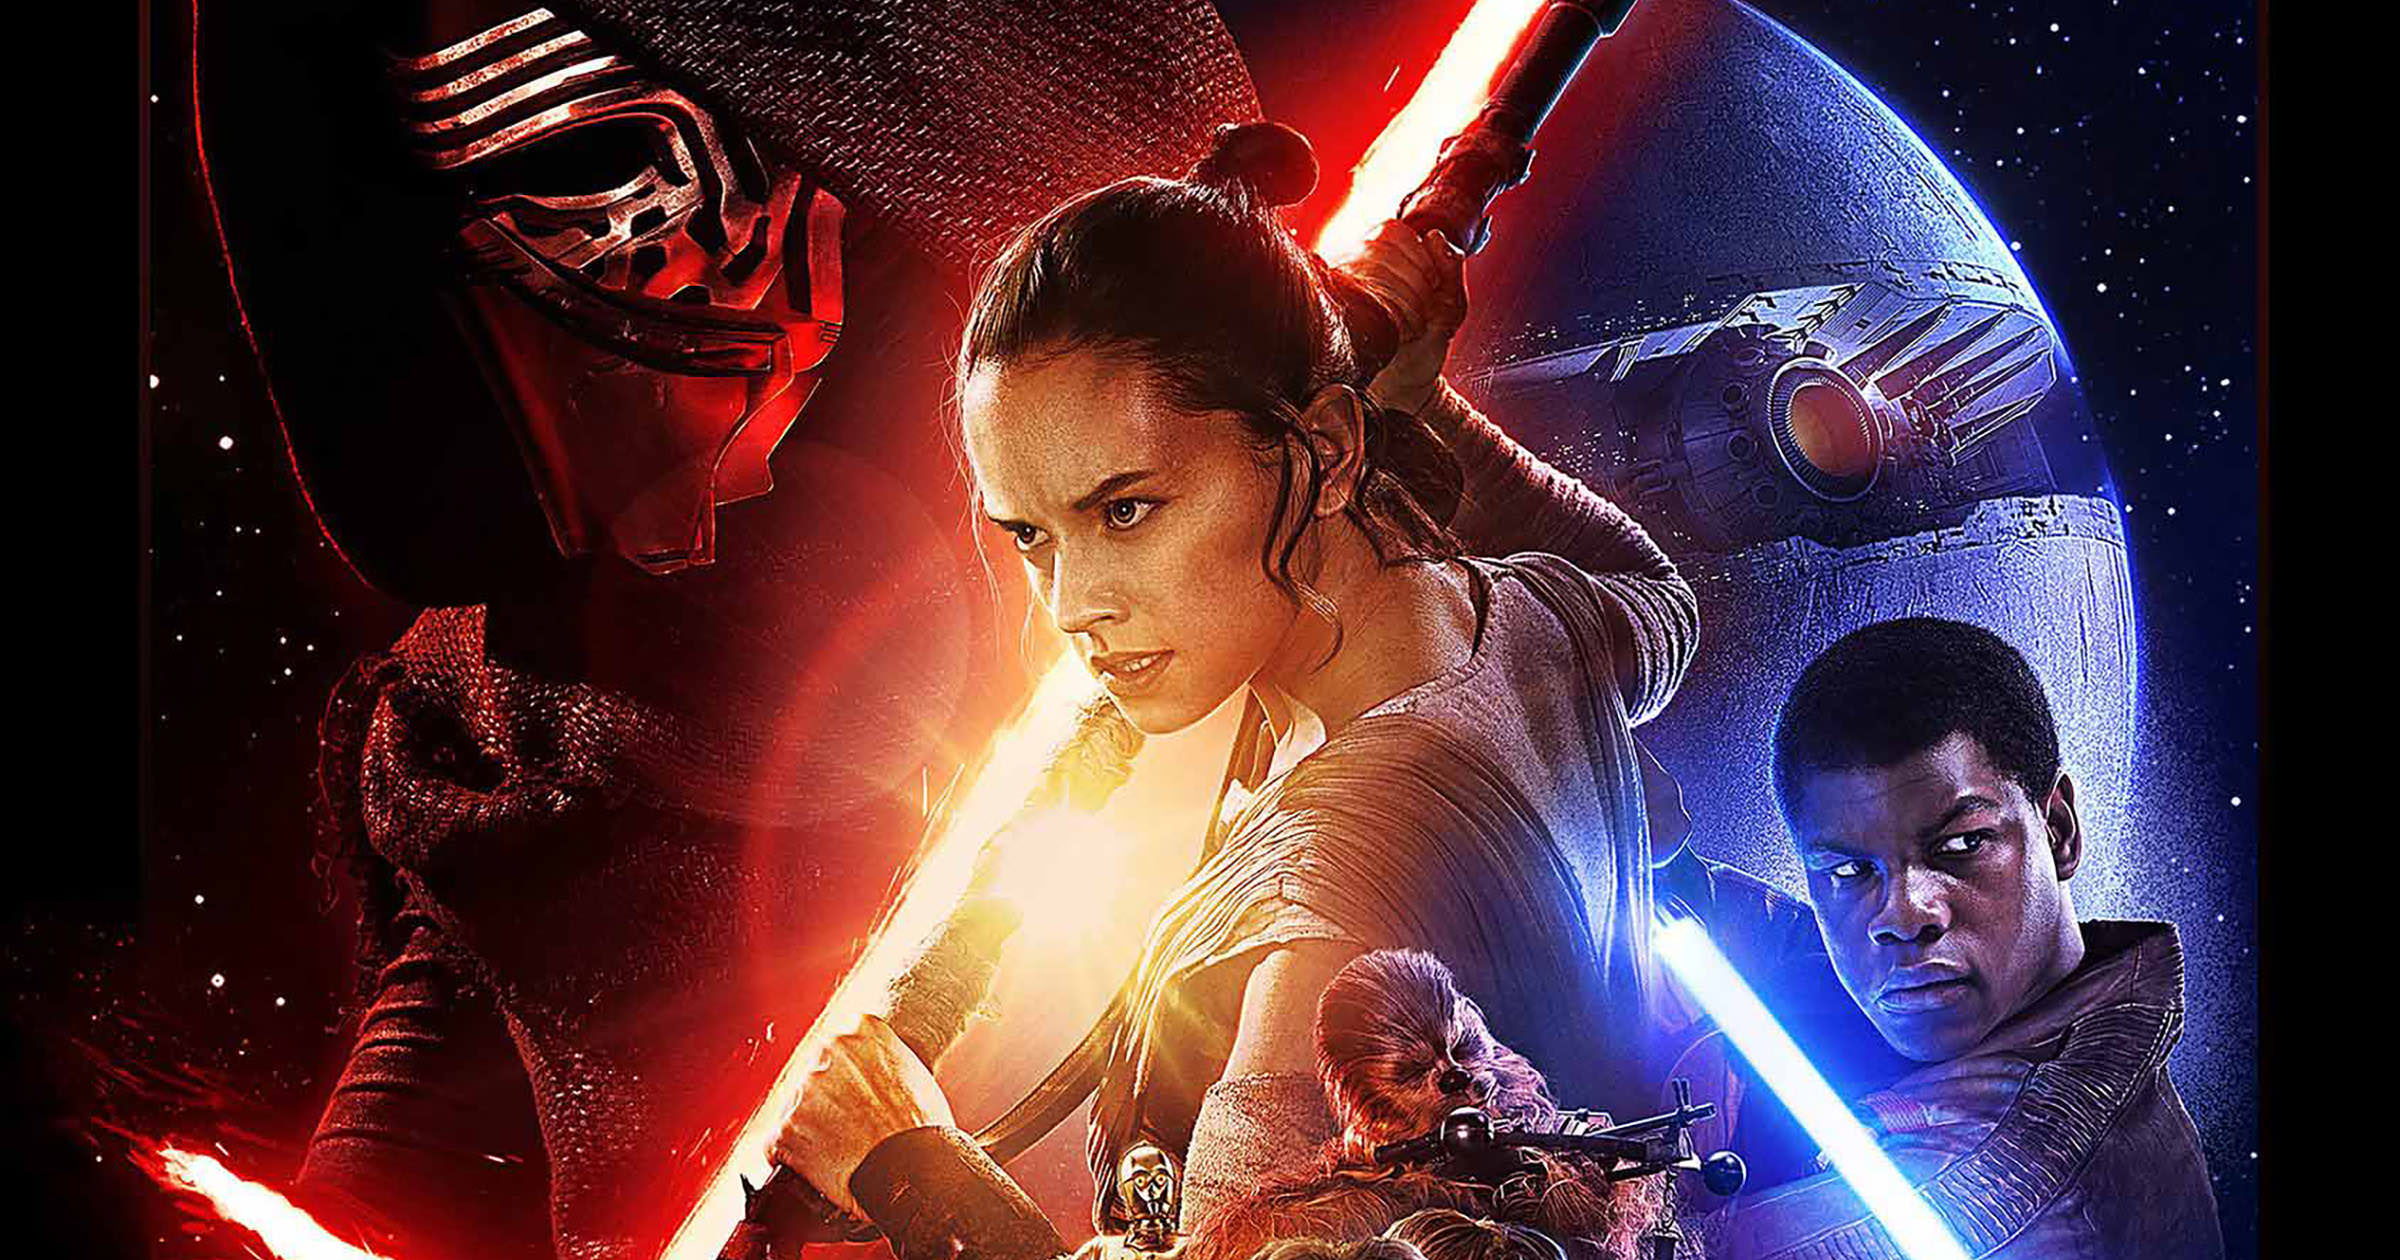 Star Wars The Force Awakens - Will Files Interview